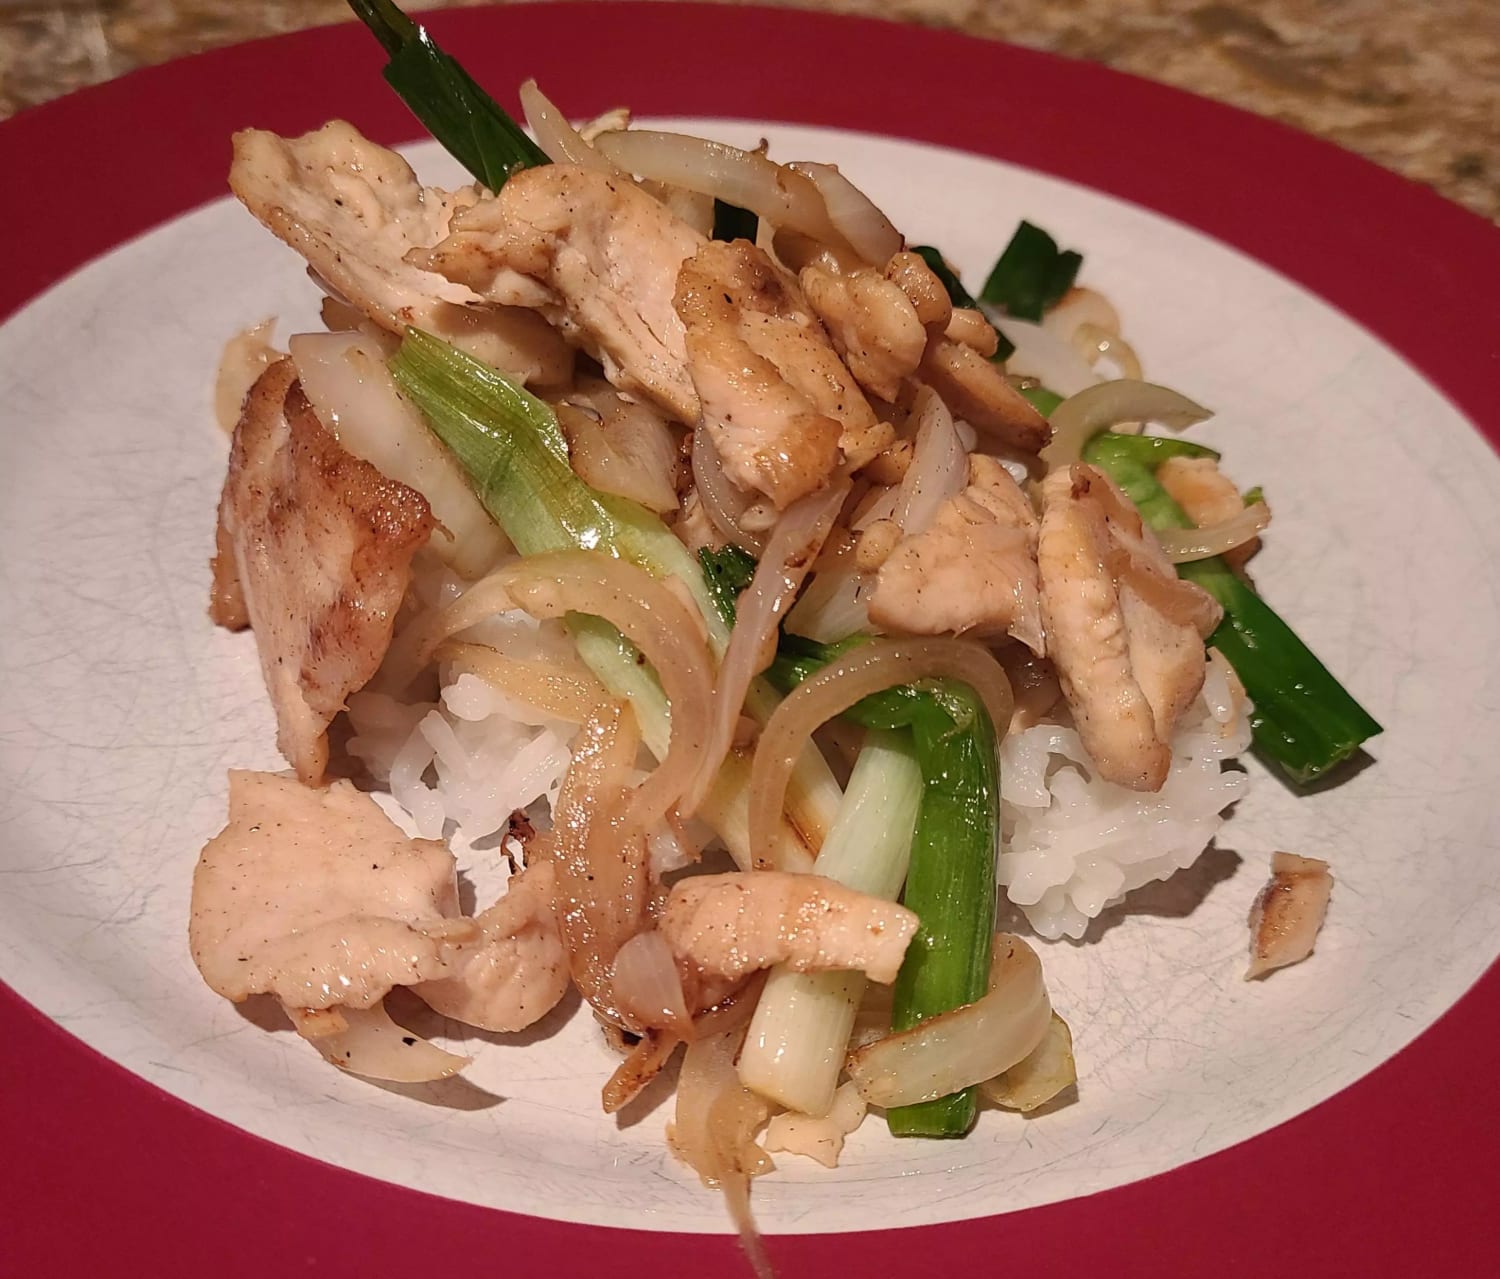 Inspired by a post by u/CharlieA44, my offering of SE Chicken with Scallions and Onions